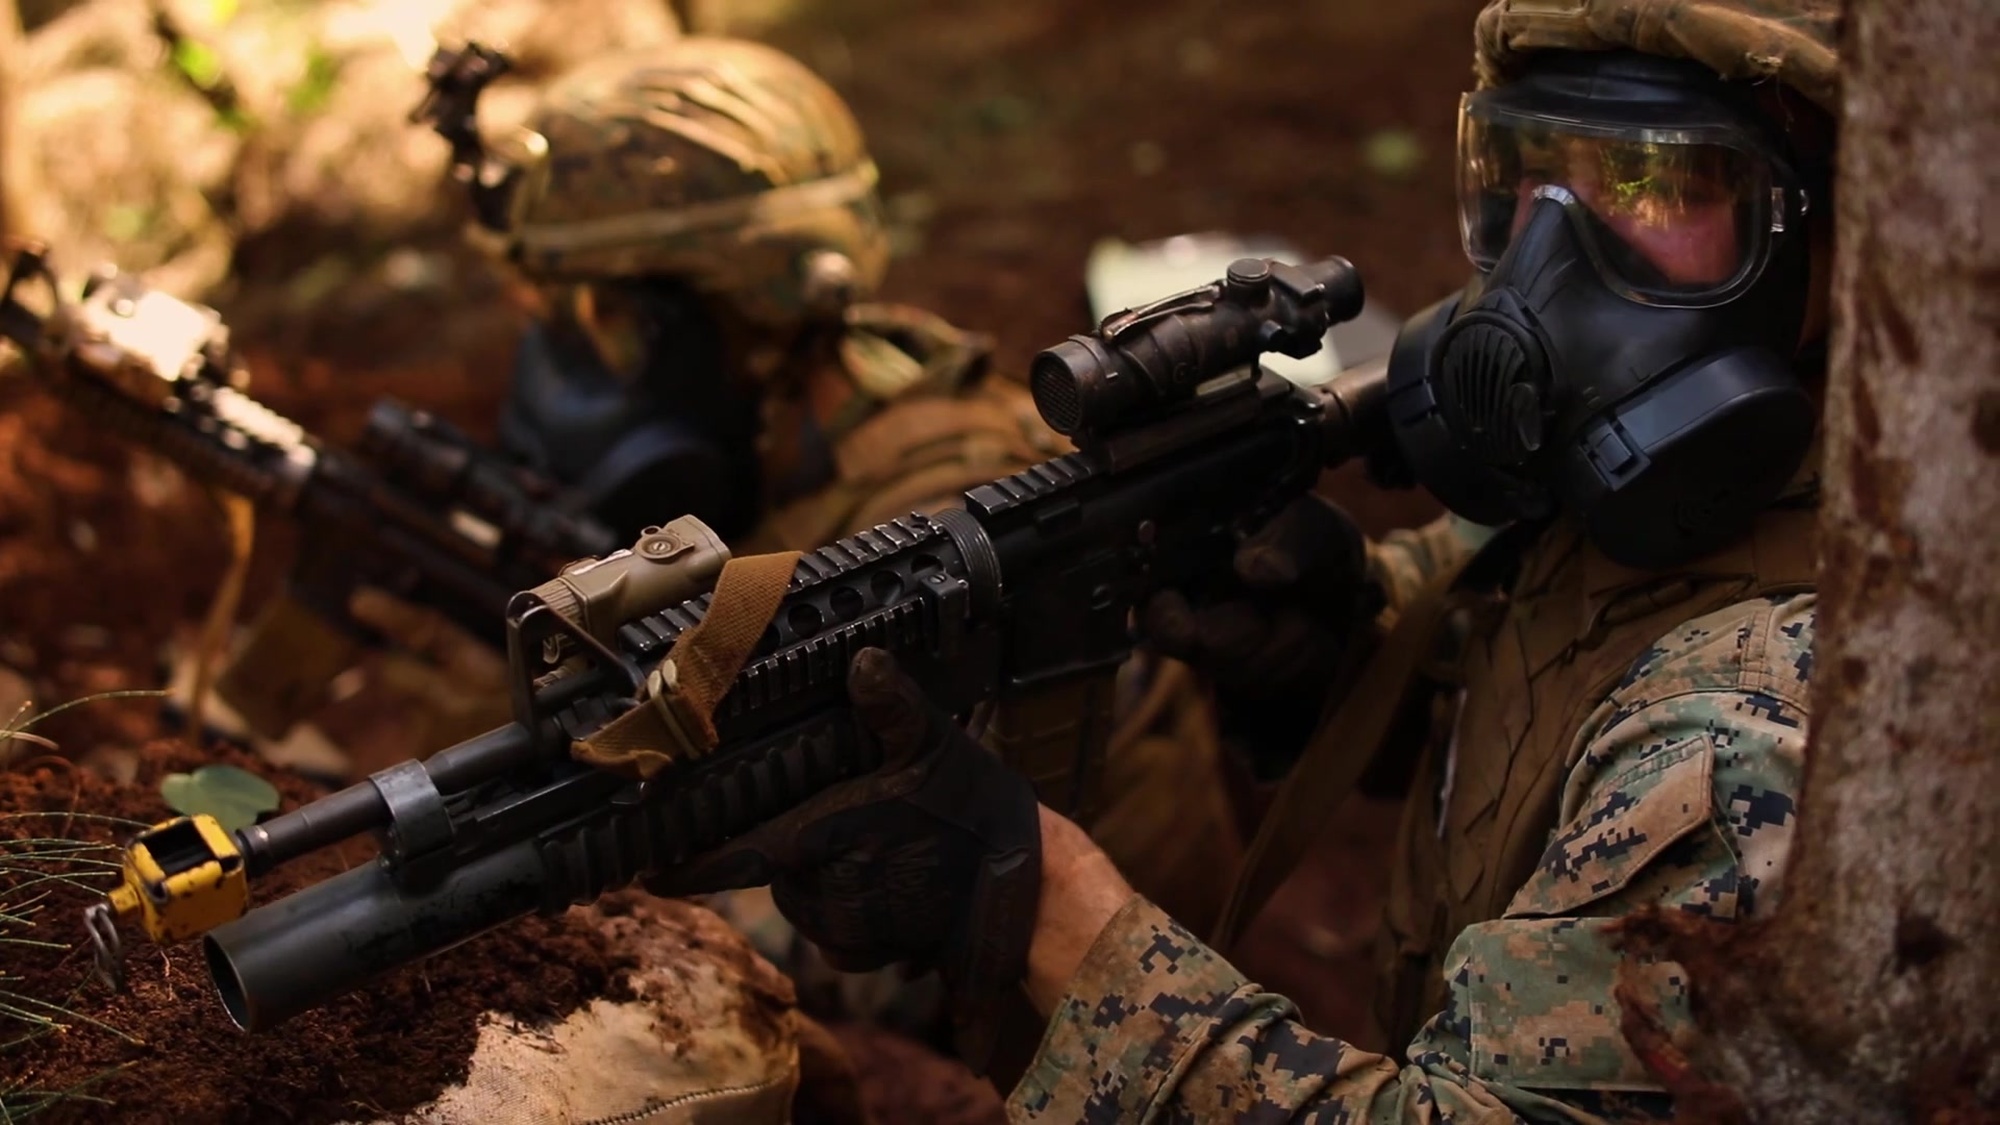 Students with Advanced Infantry Marine Course (AIMC) conduct Military Operations on Urban Terrain operation during their field leadership evaluation at Schofield Barracks, Feb. 14, 2019. AIMC is intermediate training designed to enhance and test the Marine's skills and leadership abilities as squad leaders in a rifle platoon. (U.S. Marine Corps video by Cpl. Brendan Custer)